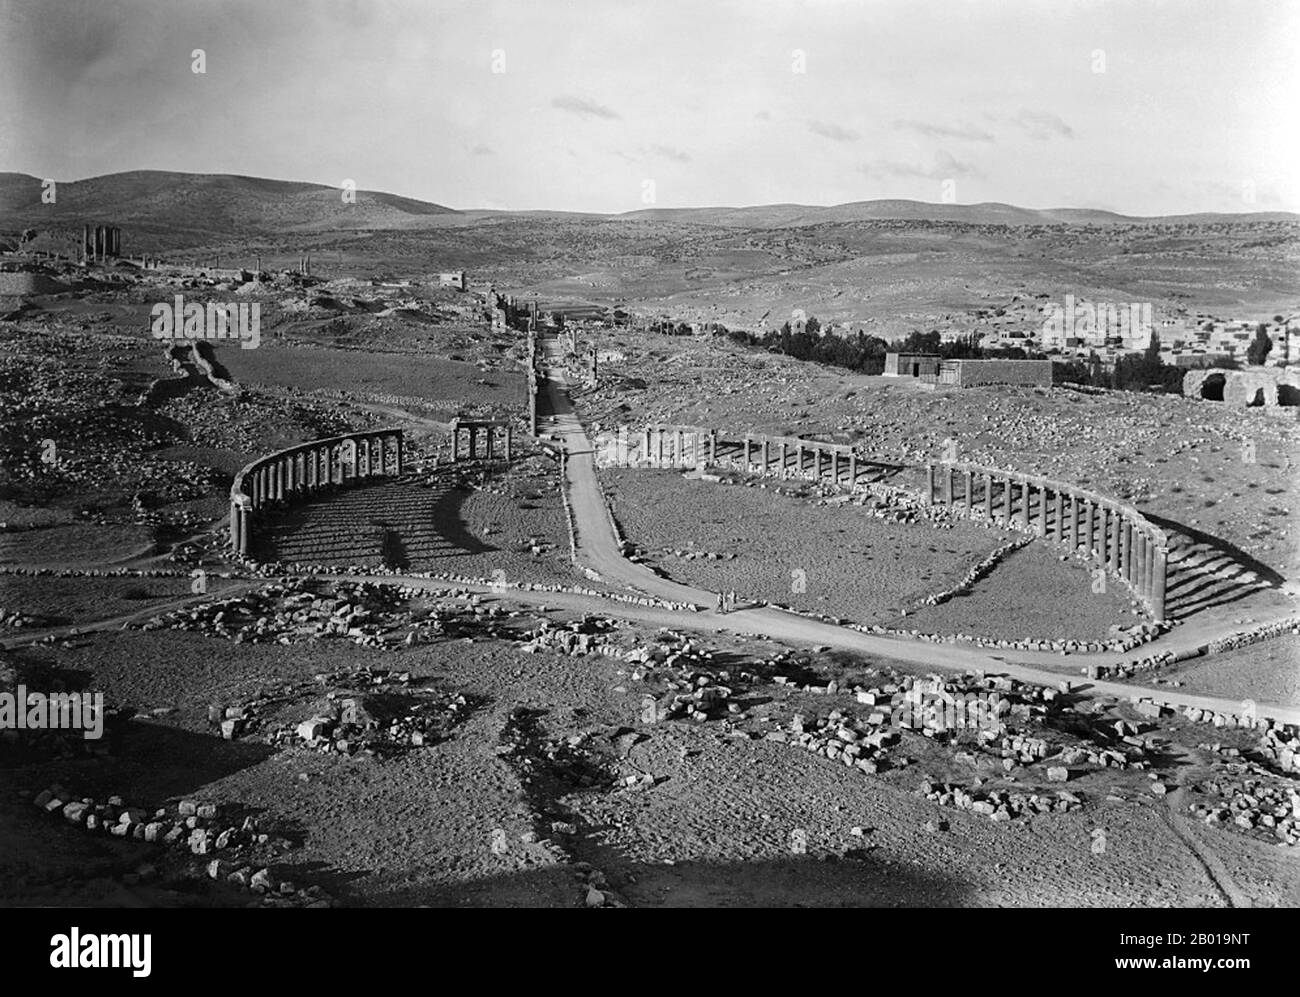 Jordan: The Roman city of Gerasa at Jerash, c. 1898-1914.  Recent excavations show that Jerash was already inhabited during the Bronze Age (3200 BCE - 1200 BCE). After the Roman conquest in 63 BC, Jerash and the land surrounding it were annexed by the Roman province of Syria, and later joined the Decapolis cities. In 90 CE, Jerash was absorbed into the Roman province of Arabia, which included the city of Philadelphia (modern day Amman). The Romans ensured security and peace in this area, which enabled its people to devote their efforts and time to economic development. Stock Photo